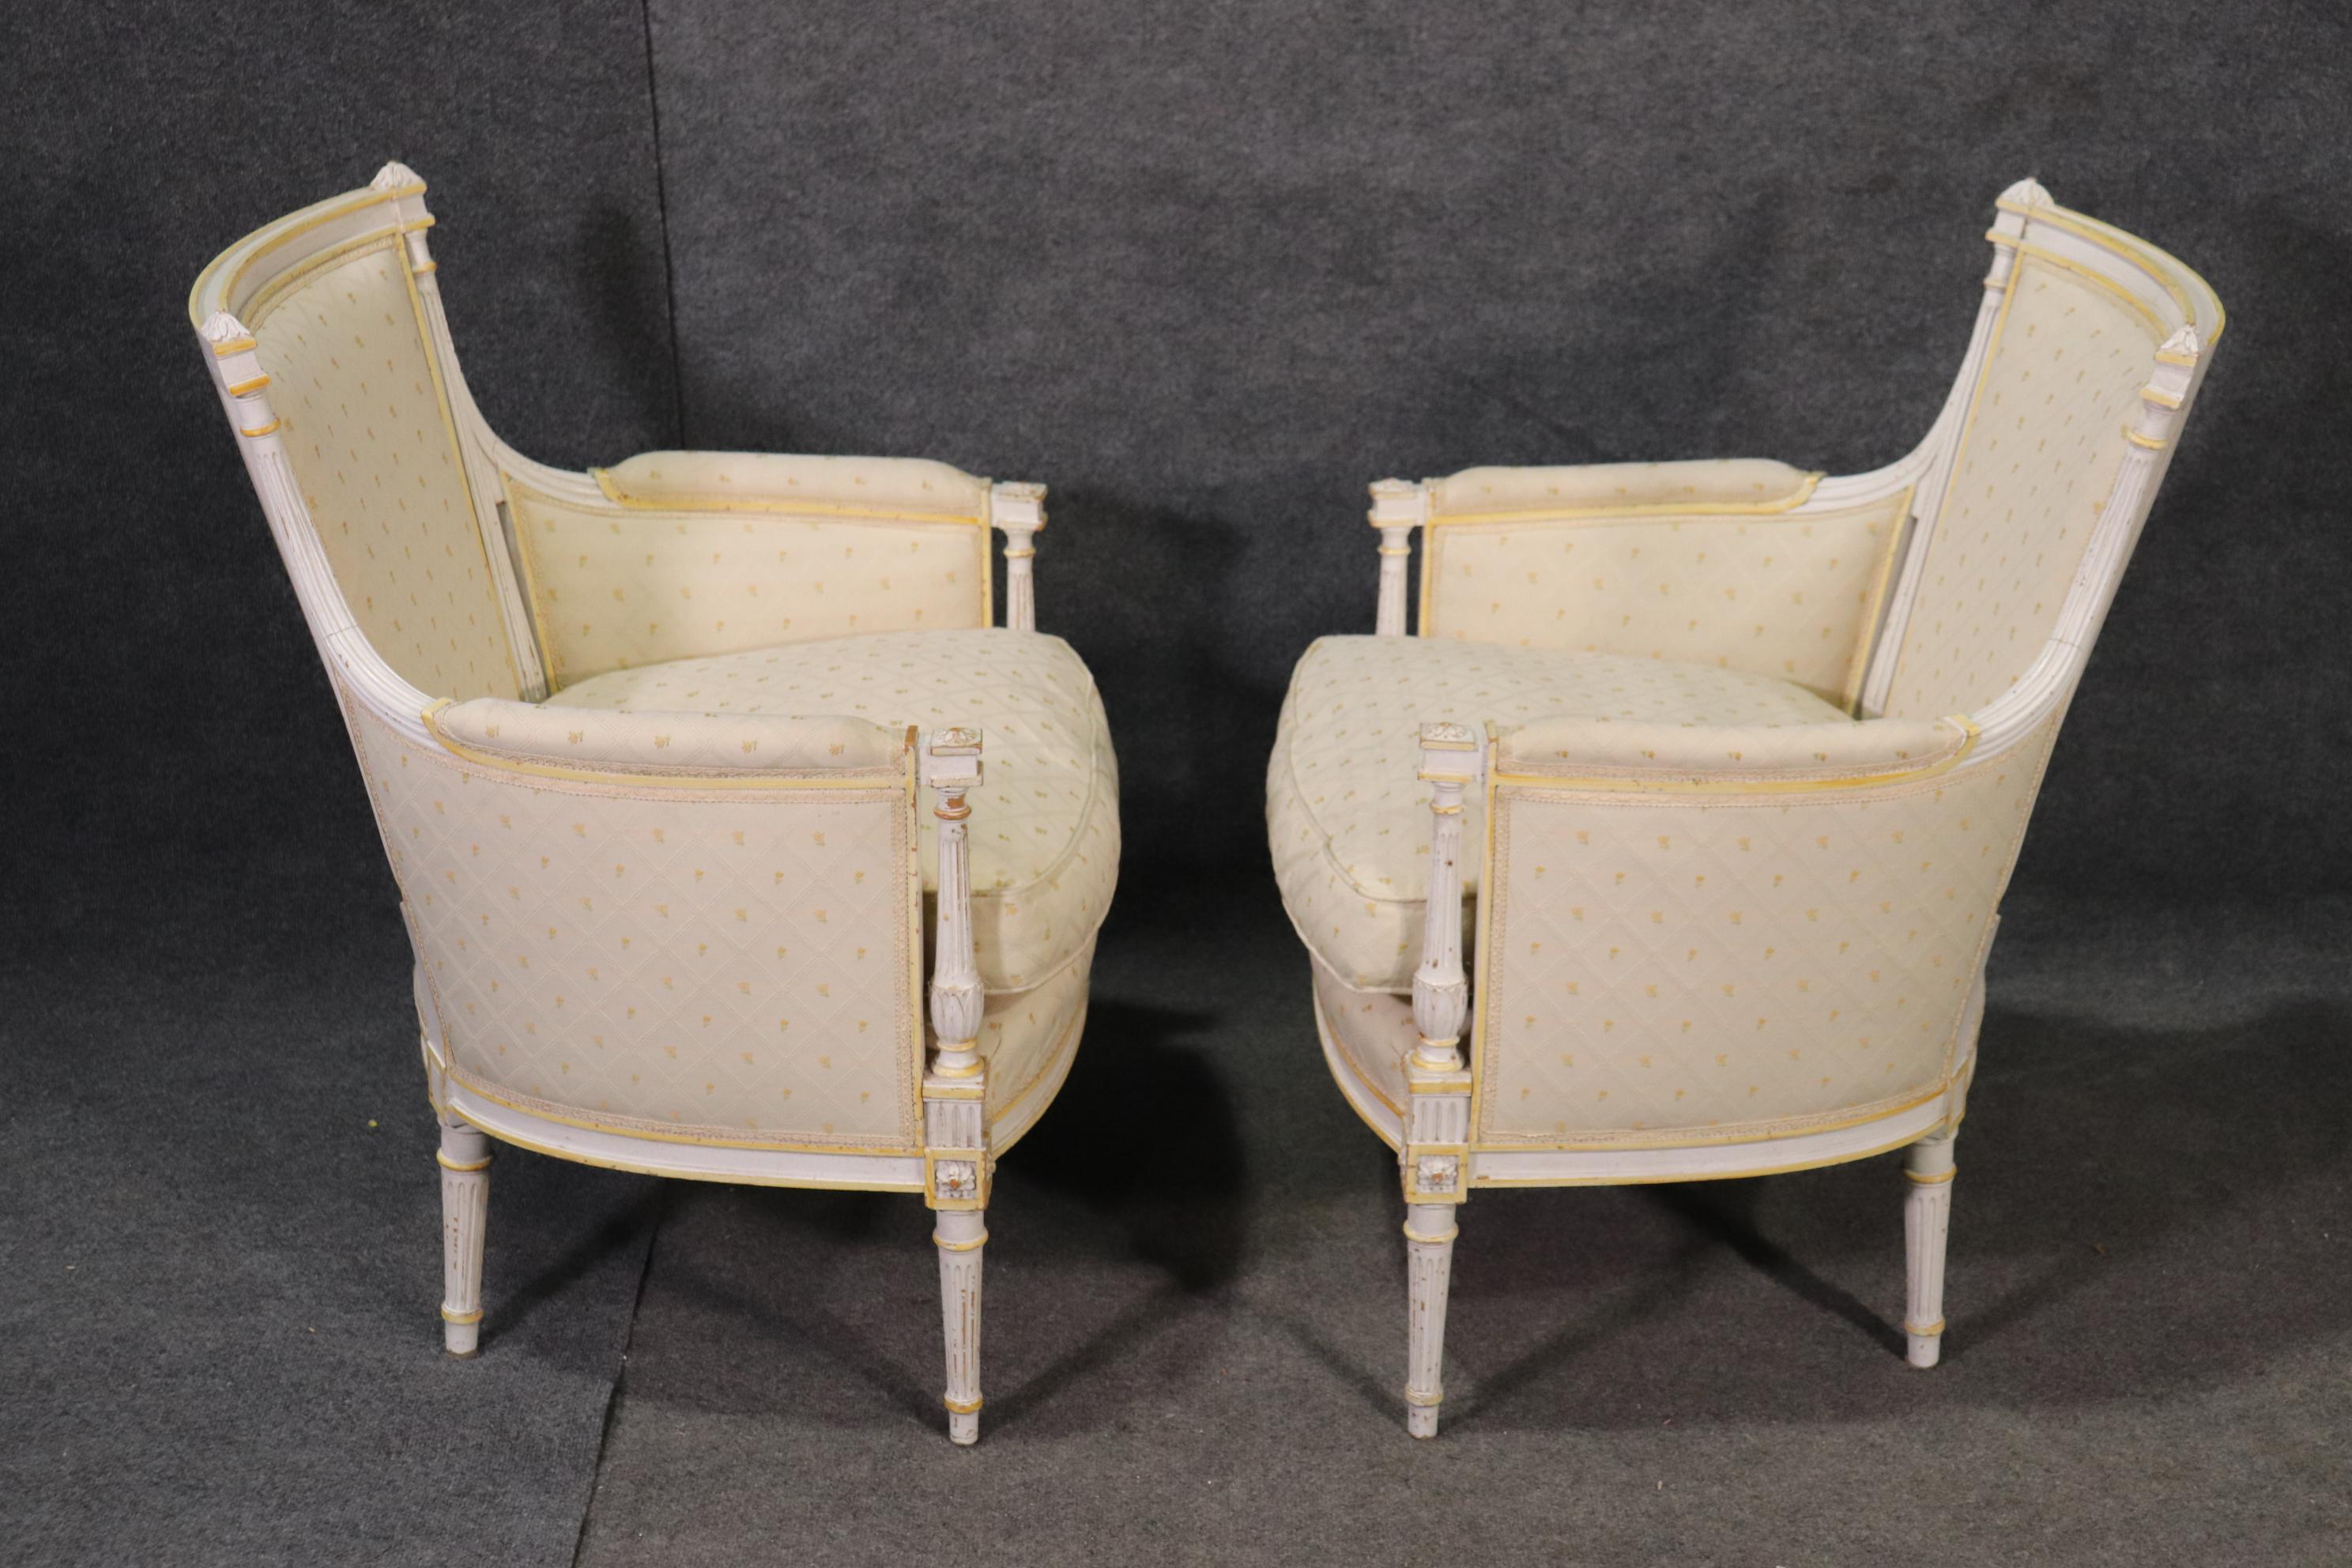 This is a signed pair of Maison Jansen bergère chairs with some subtle yellow highlights and in good condition. The chairs each measure 35 tall x 27 wide x 27 deep and the seat height is 20 inches. These are beautiful designs and in good vintage